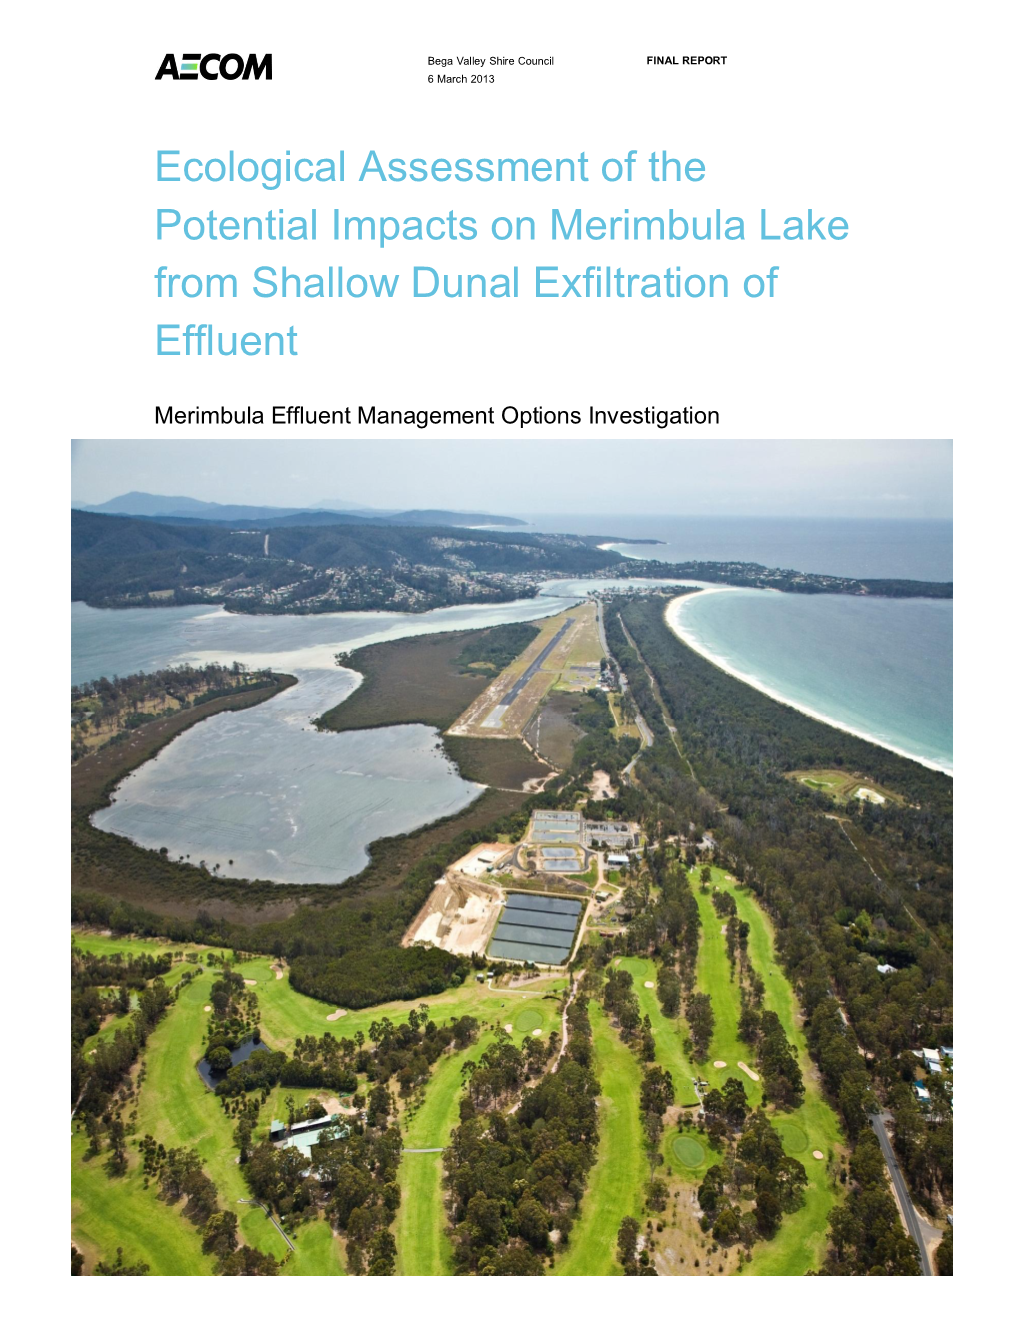 Ecological Assessment of the Potential Impacts on Merimbula Lake from Shallow Dunal Exfiltration of Effluent